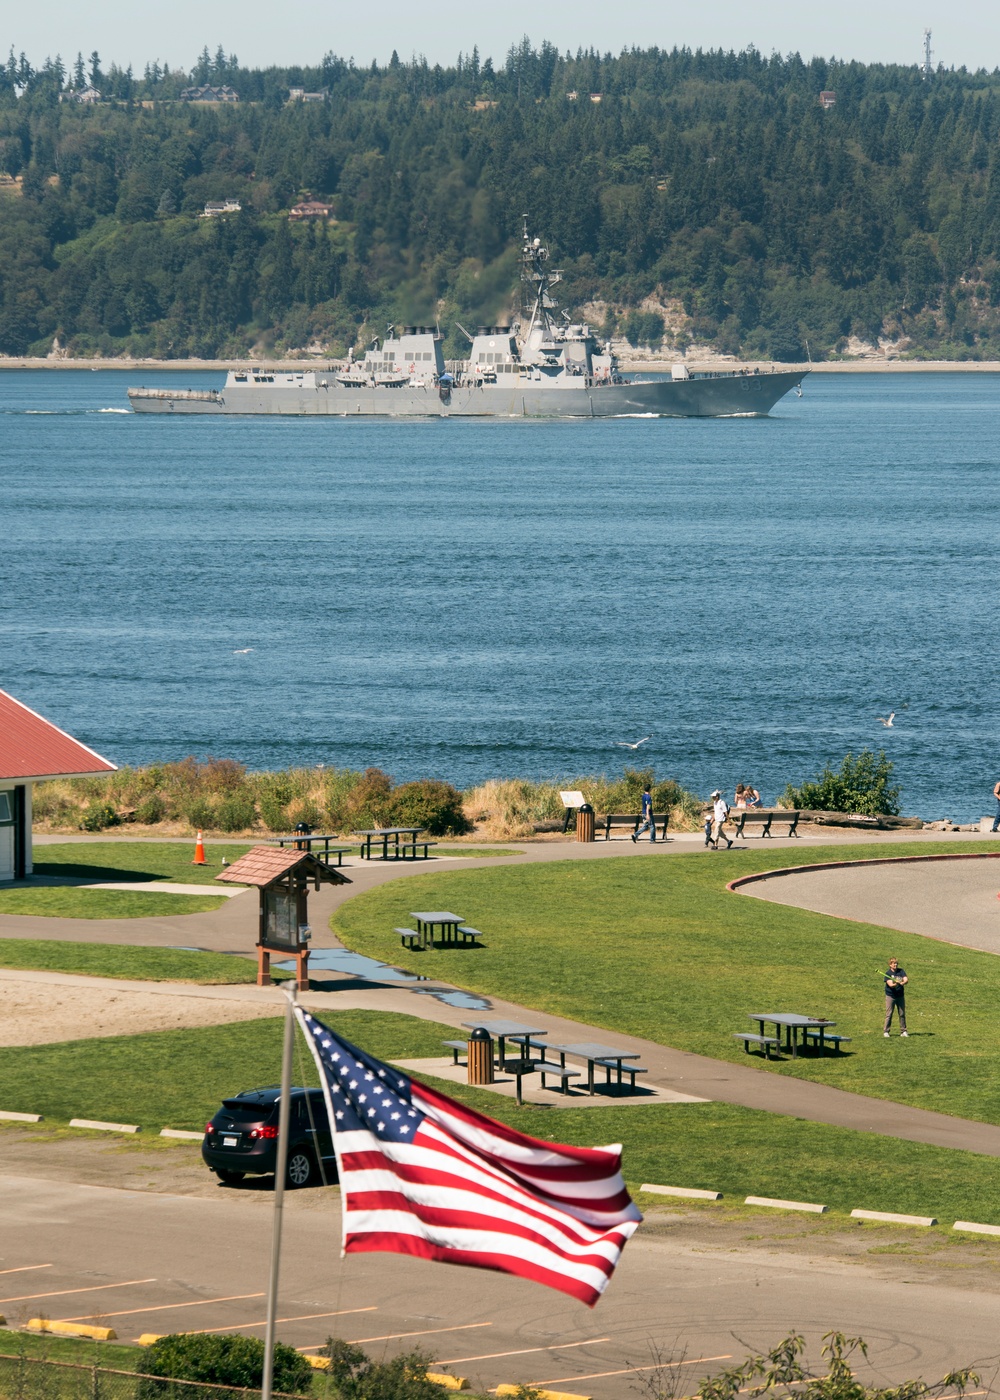 he Arleigh Burke-class destroyer USS Howard (DDG 83) passes the Mukilteo Lighthouse park on her way to Naval Station Everett